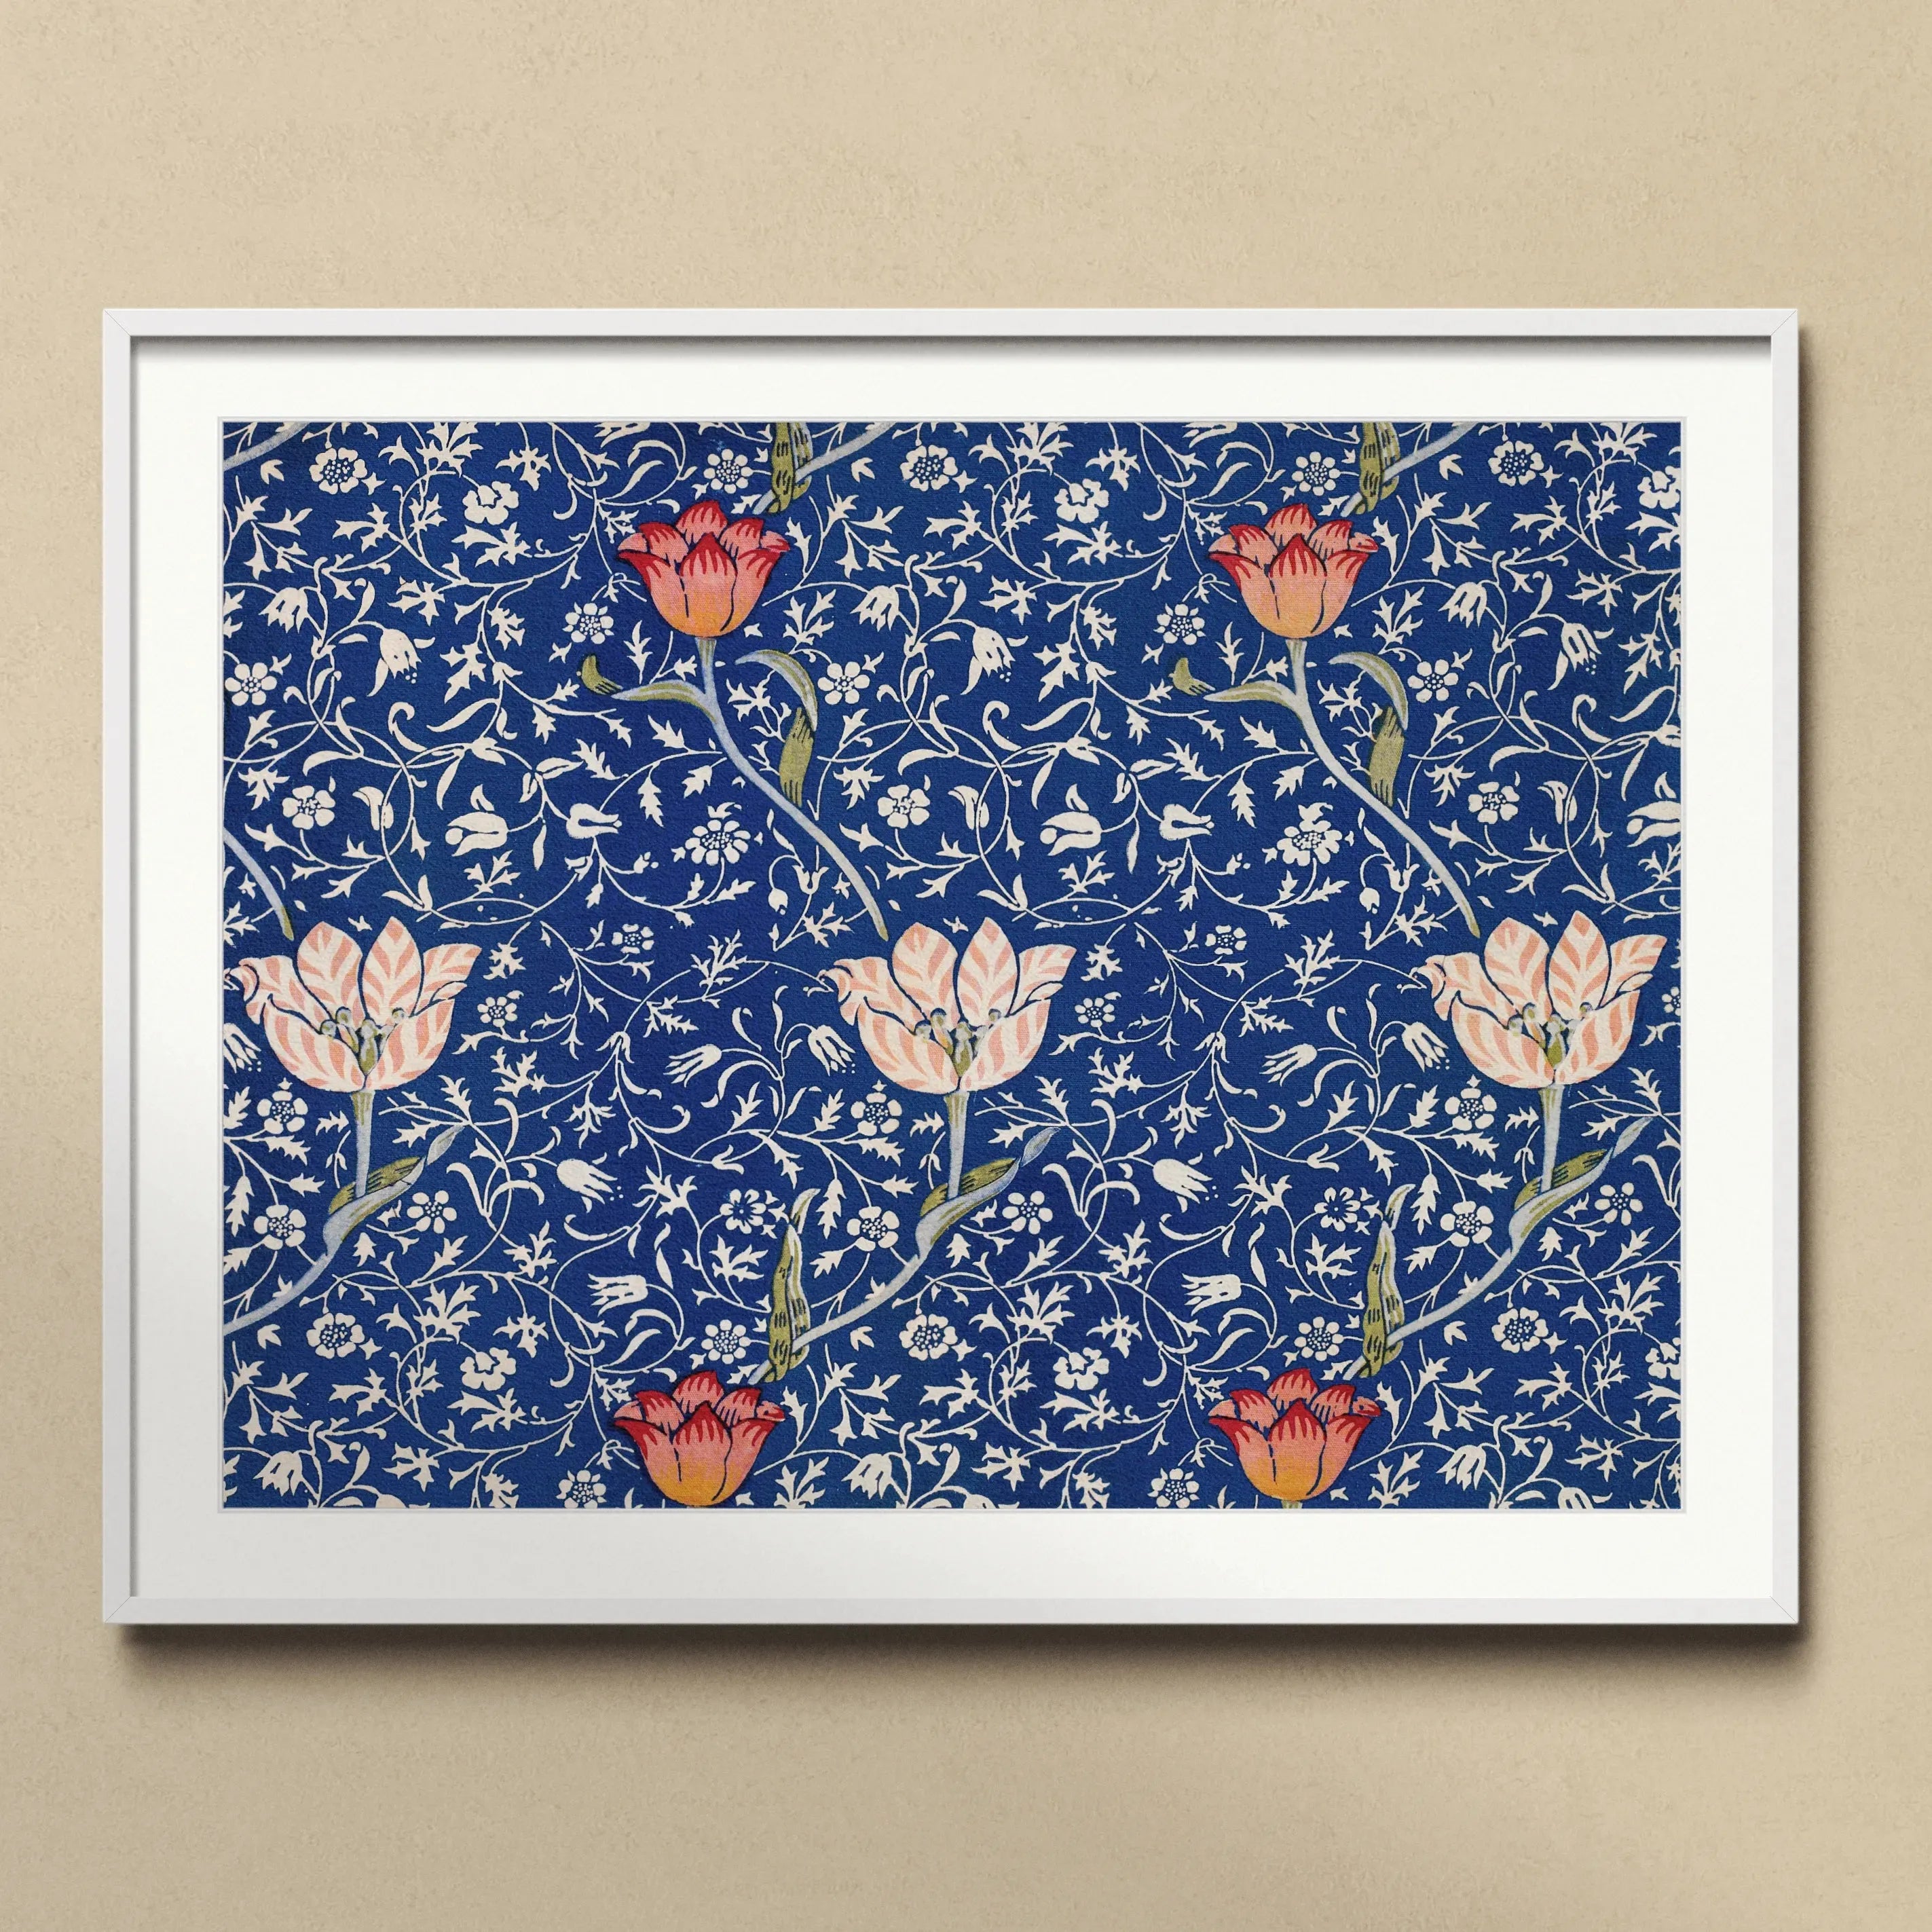 Medway By William Morris Framed & Mounted Print - Posters Prints & Visual Artwork - Aesthetic Art